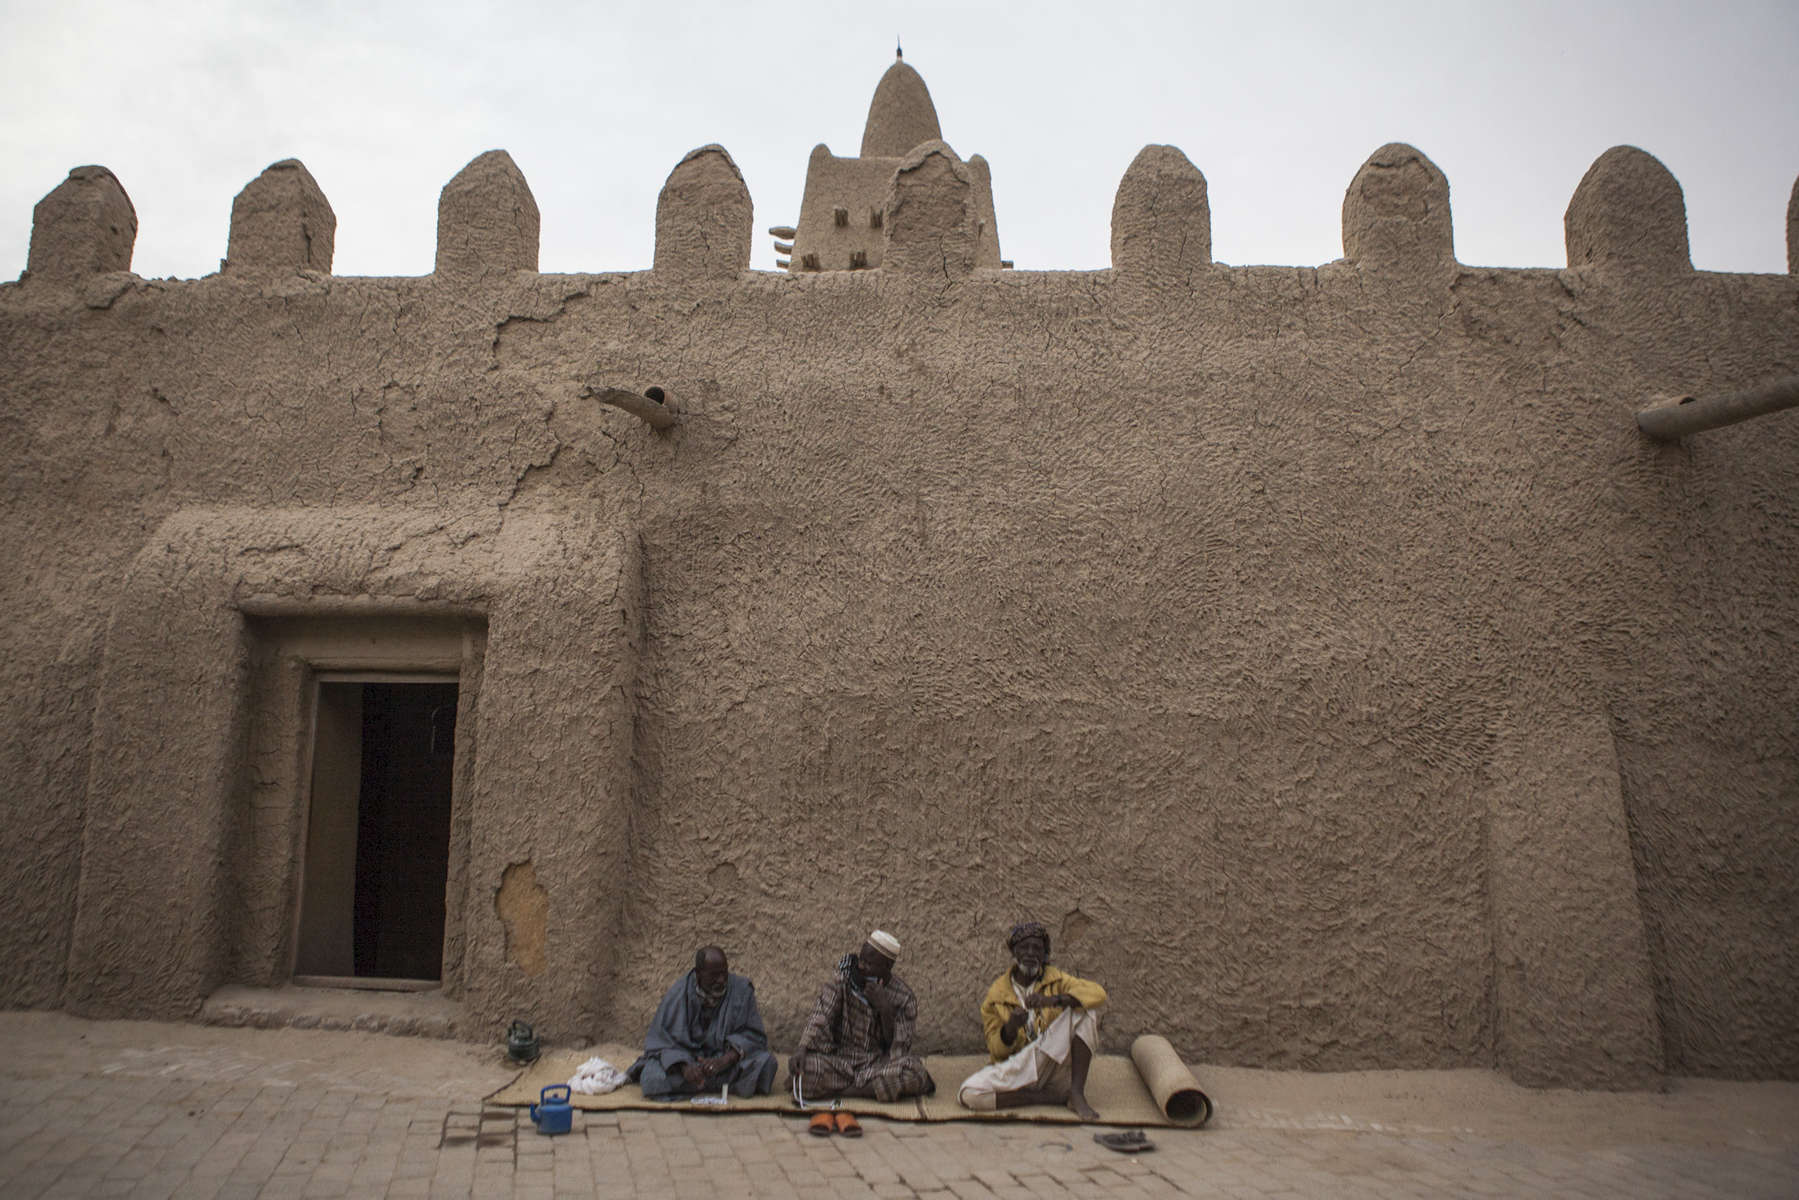 Men sit outside of the Sankore Mosque in Timbuktu, Mali on Monday, January 9, 2017. The Sakore Mosque was built in 1325 and is one of three learning centers in Timbuktu. It was partially destroyed during the occupation but has since been rebuilt. 